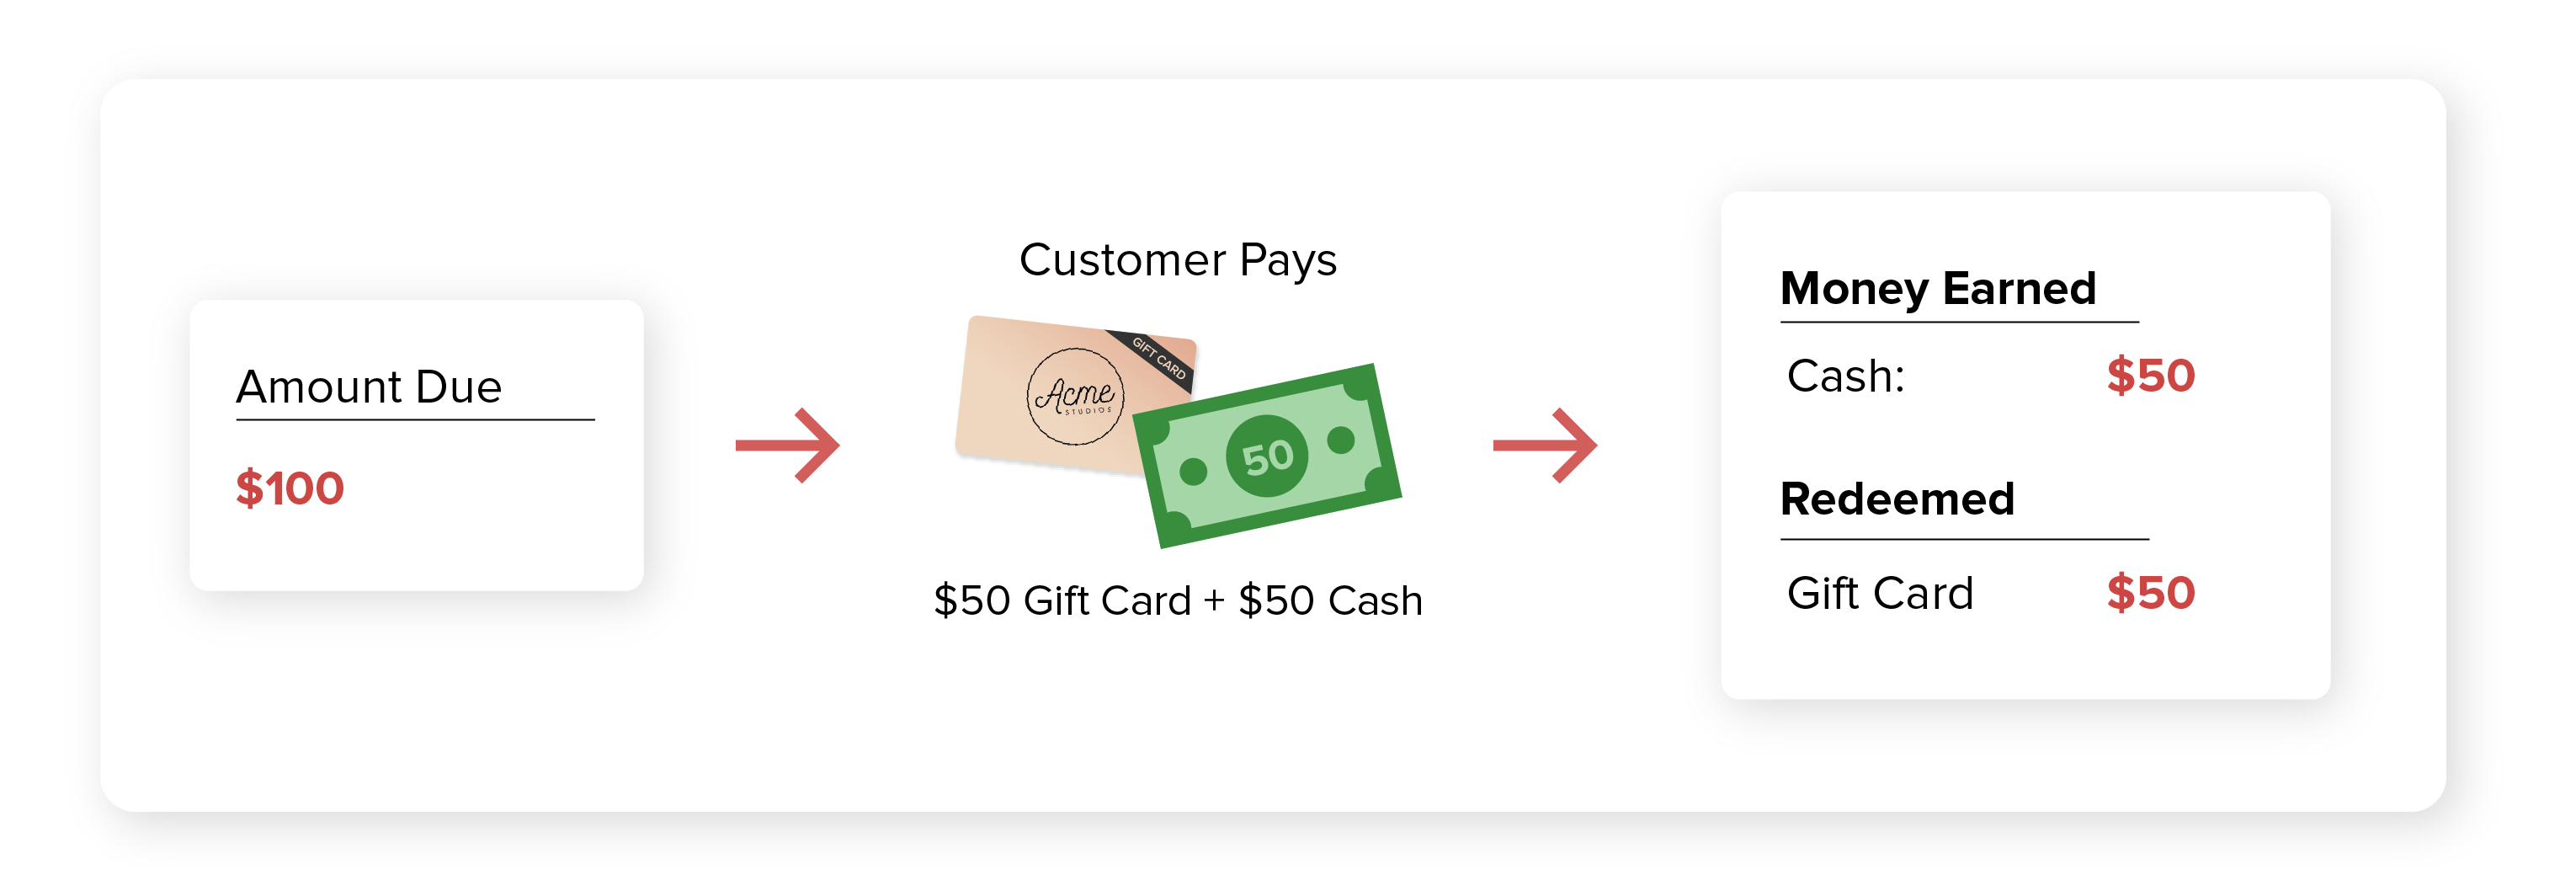 gift_card_for_cash_payment.png